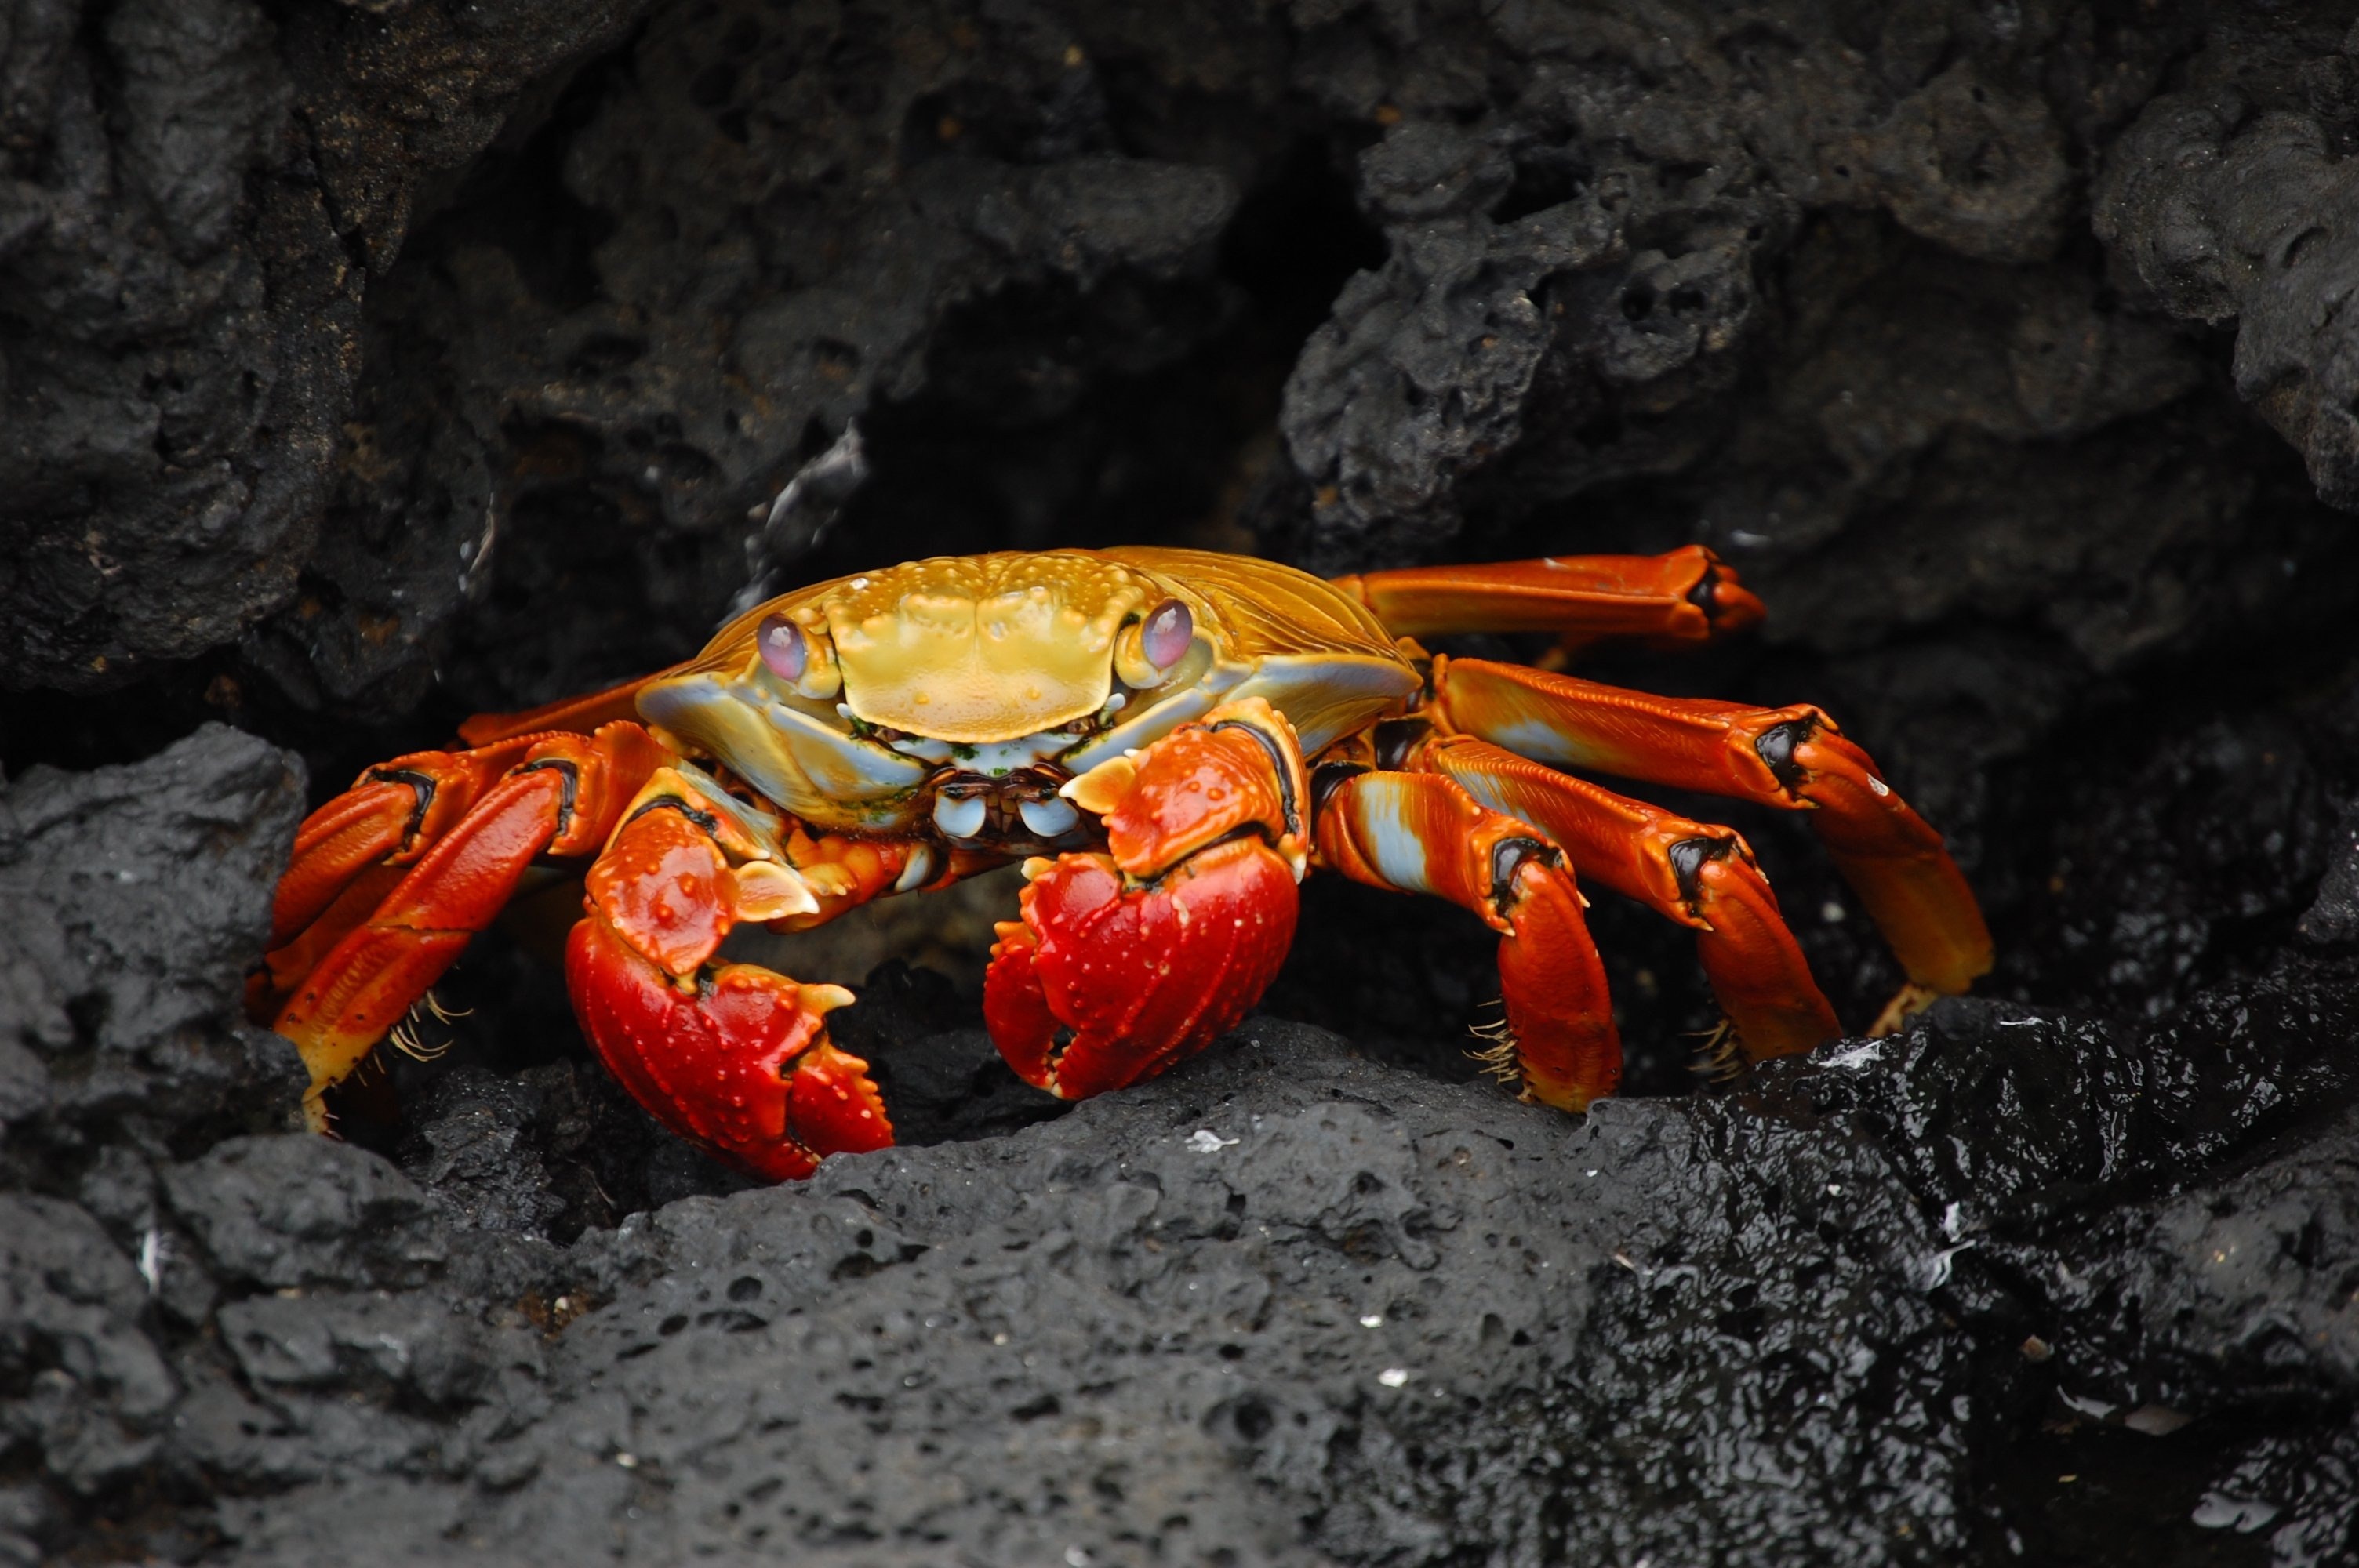 Image of a red crab on black rocks